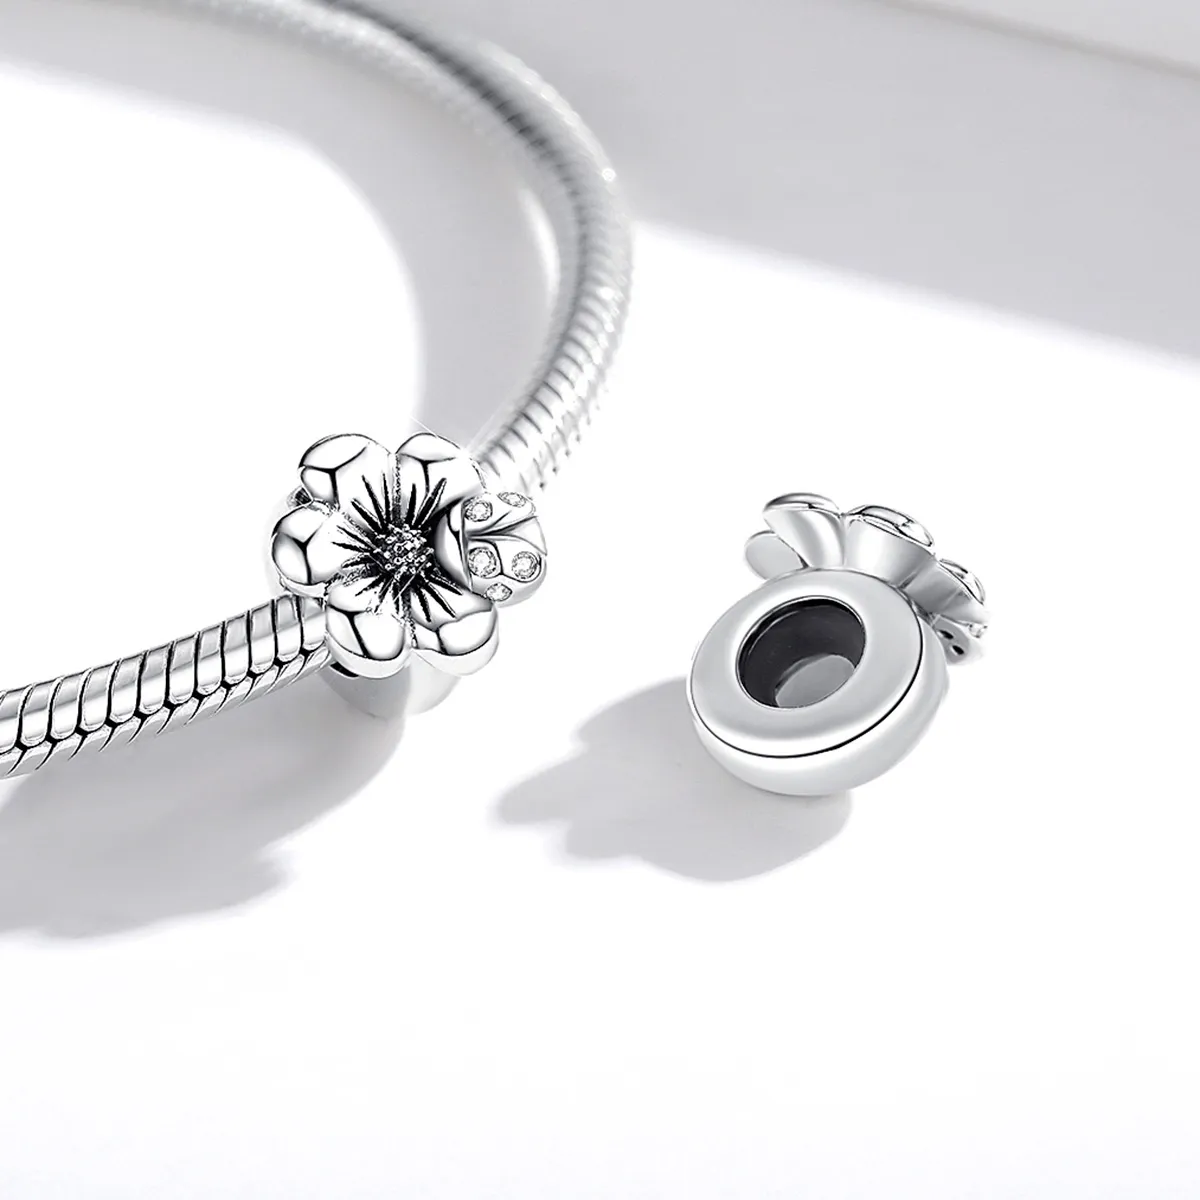 Pandora Style Silver Blooming Flower Charm - SCC1722